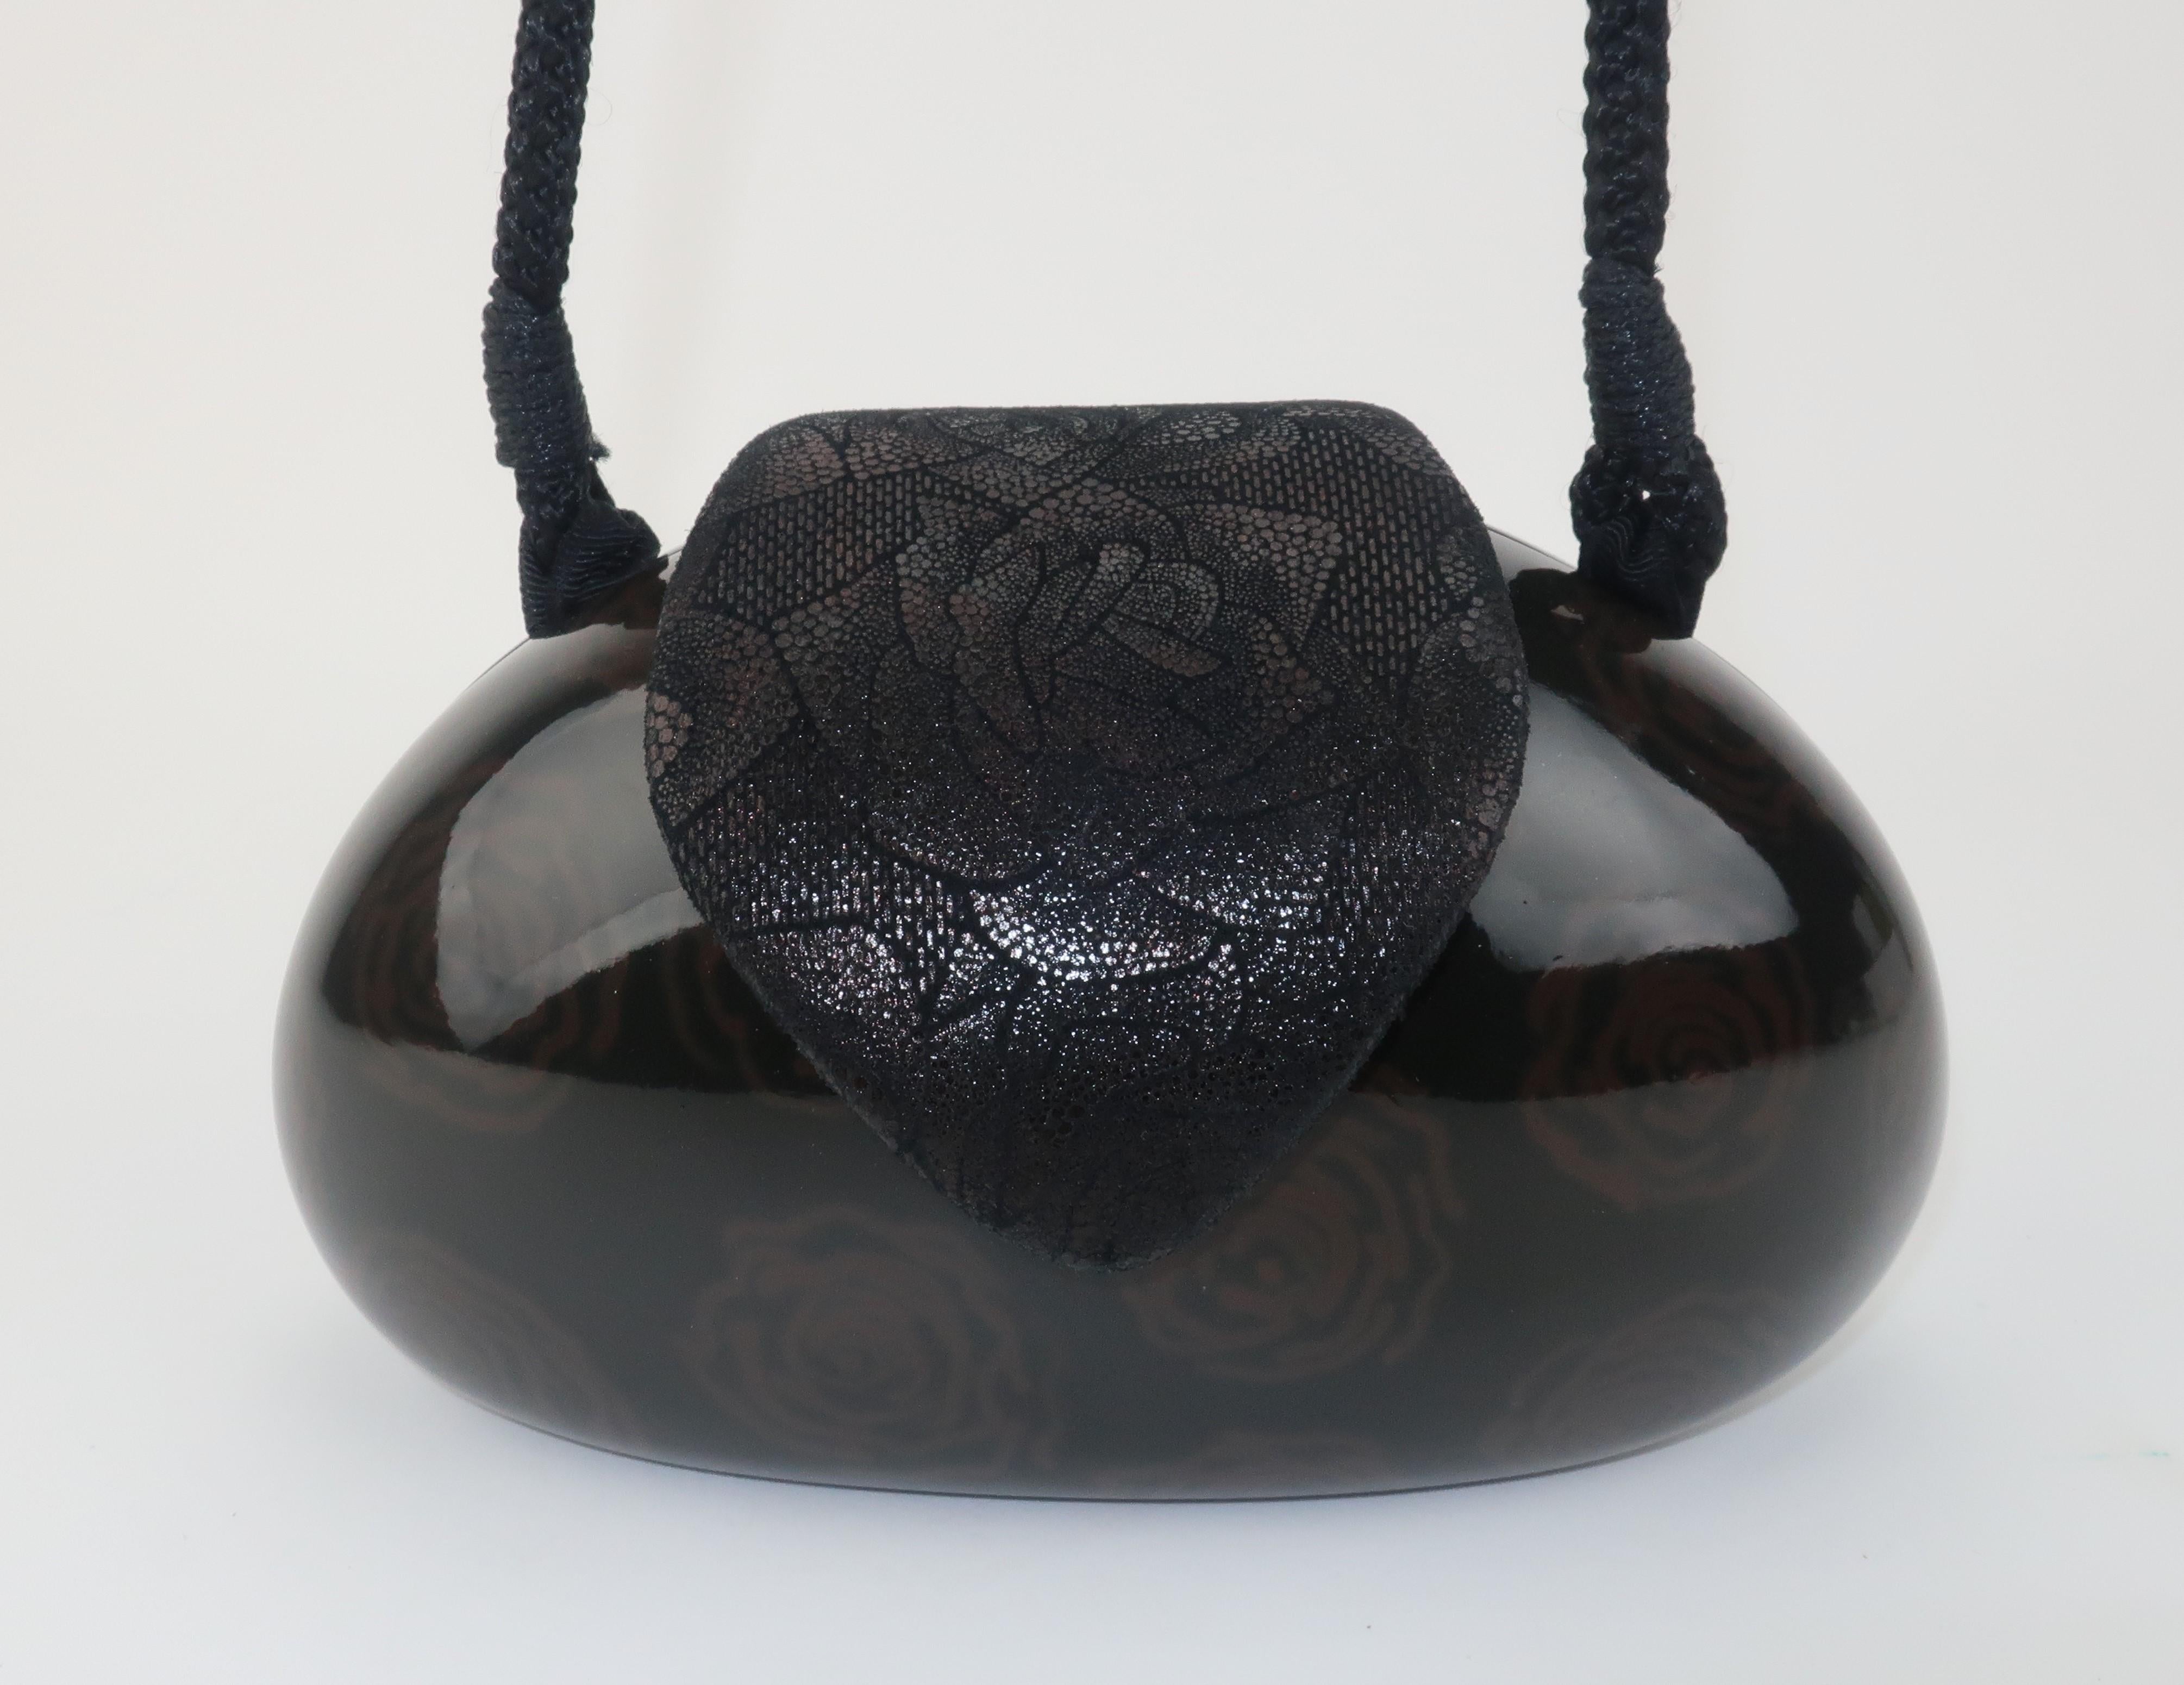 Witty ... whimsical ... wearable ... AND wooden!  This vintage Timmy Woods of Beverly Hills black lacquered wooden handbag has a capsule shape with a subtle brown floral pattern.  The unique snap top closure is a printed leather that combines a